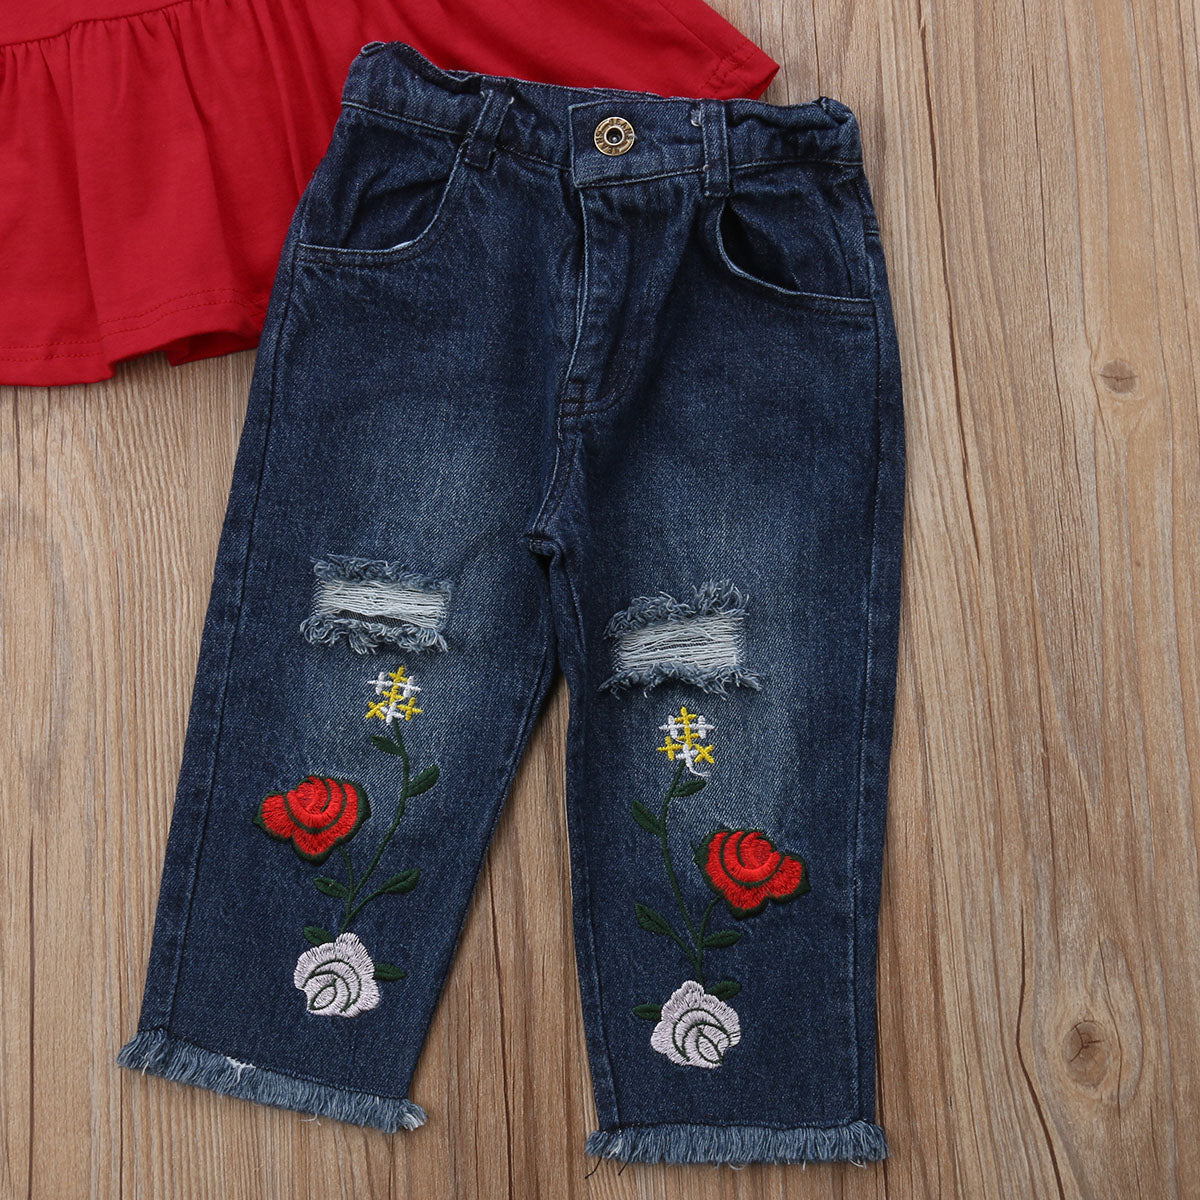 Sienna Petal Sleeve Top & Embroidery Denim Pant Set - Abby Apples Boutique